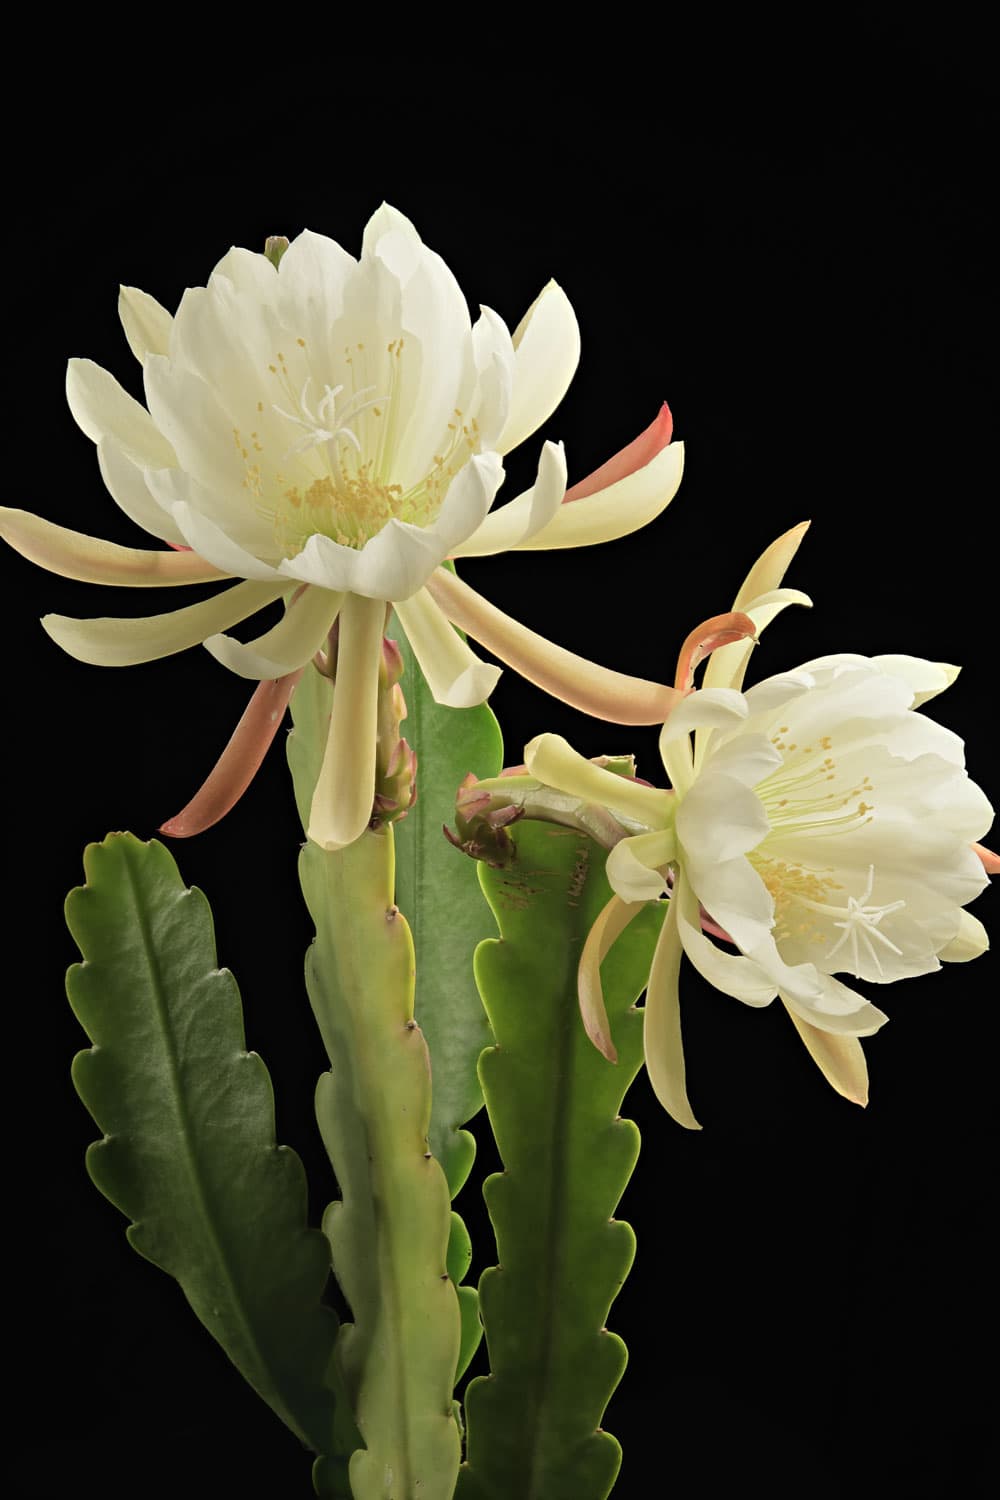 White epiphyllum flower or Queen of the night flower